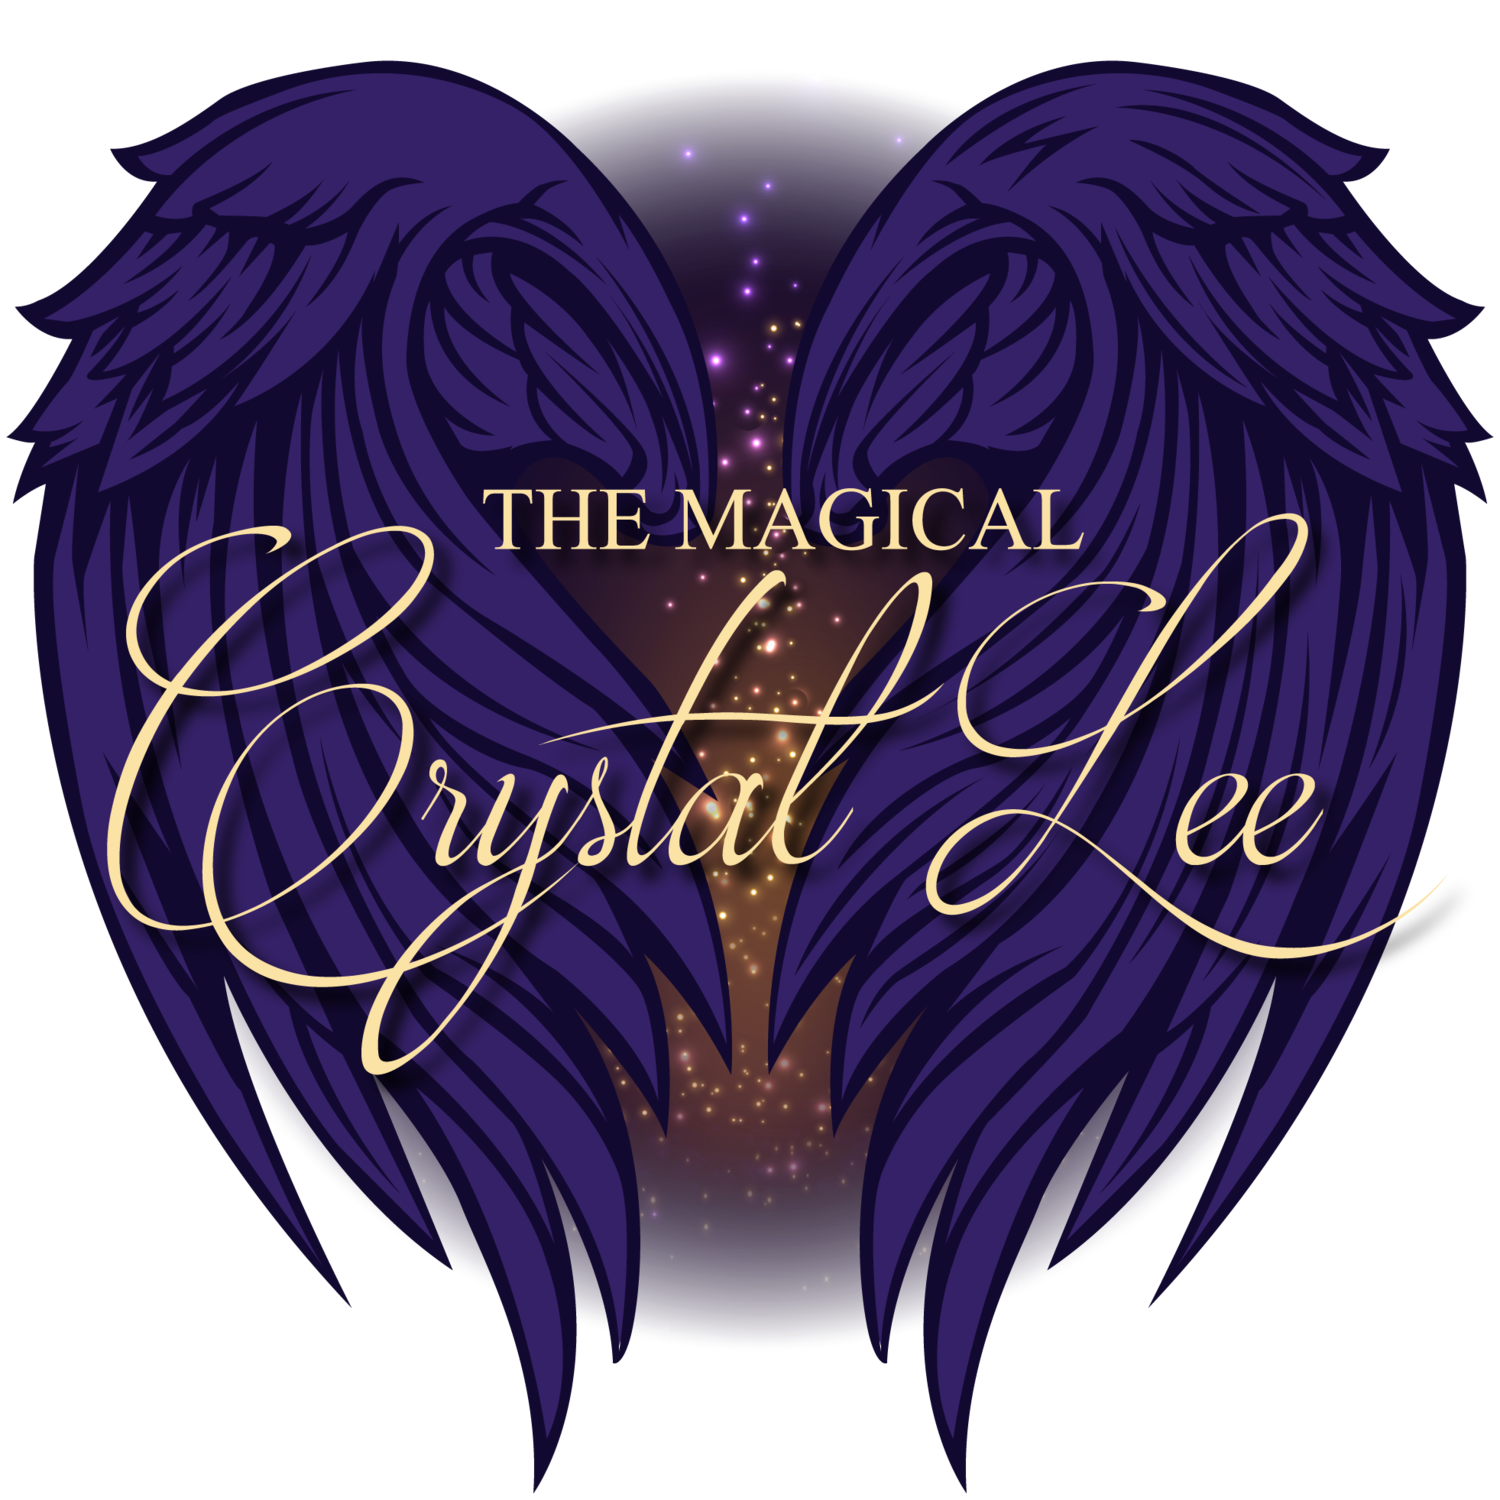 The Magical Crystal Lee